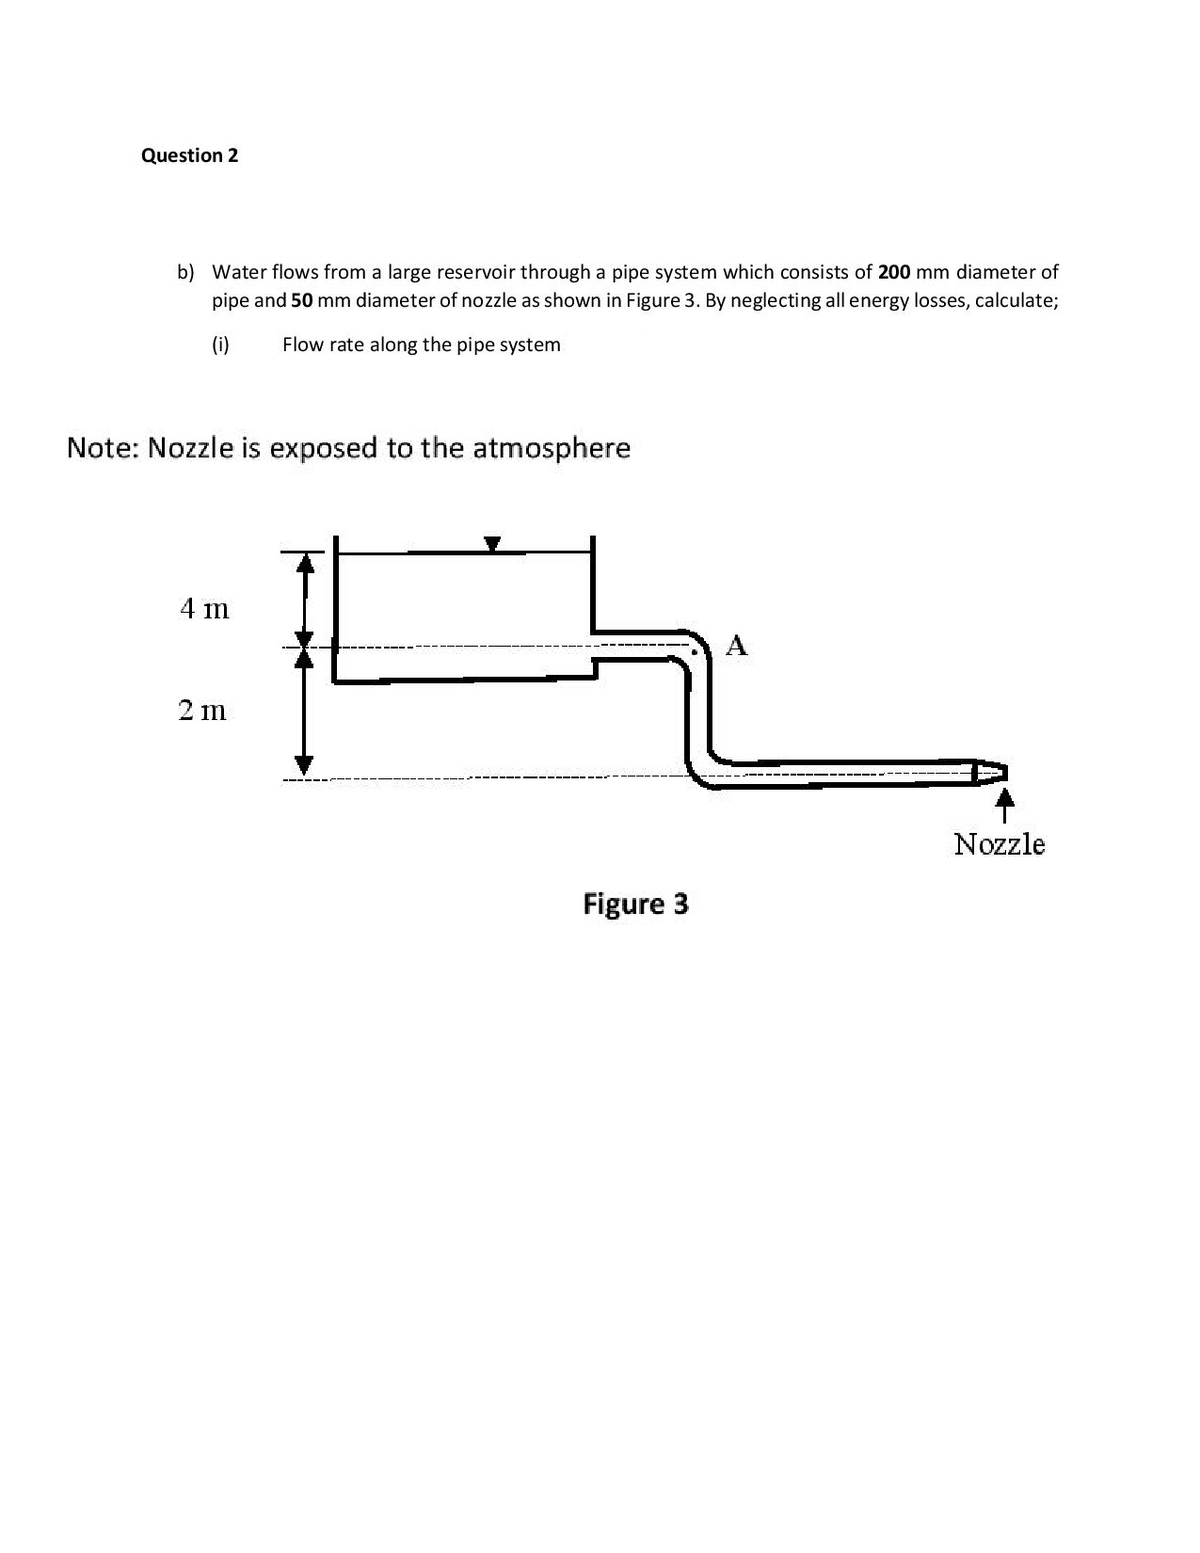 Question 2
b) Water flows from a large reservoir through a pipe system which consists of 200 mm diameter of
pipe and 50 mm diameter of nozzle as shown in Figure 3. By neglecting all energy losses, calculate;
(i)
Flow rate along the pipe system
Note: Nozzle is exposed to the atmosphere
4 m
2 m
---- ---- --
Nozzle
Figure 3
